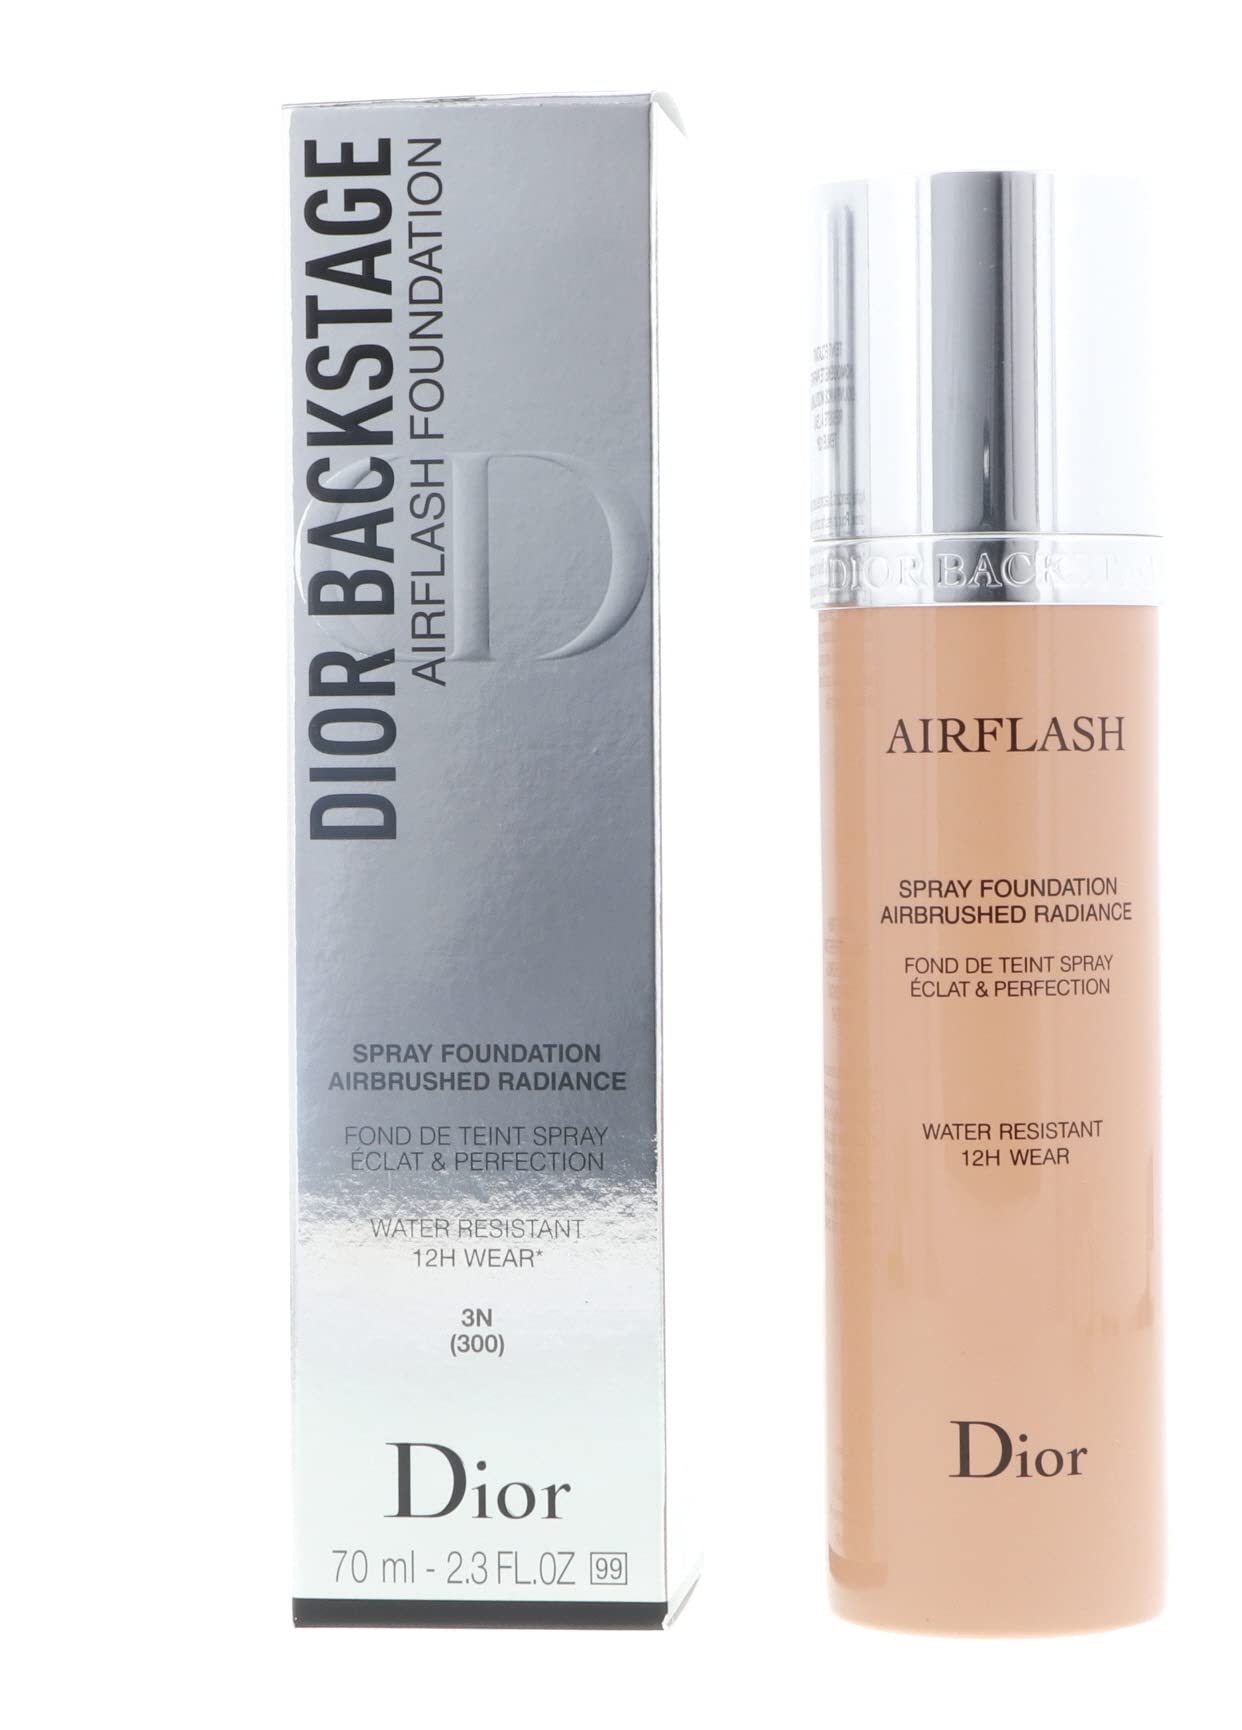 Dior Airflash Airbrush Foundation Review  Is It Life Changing  YouTube